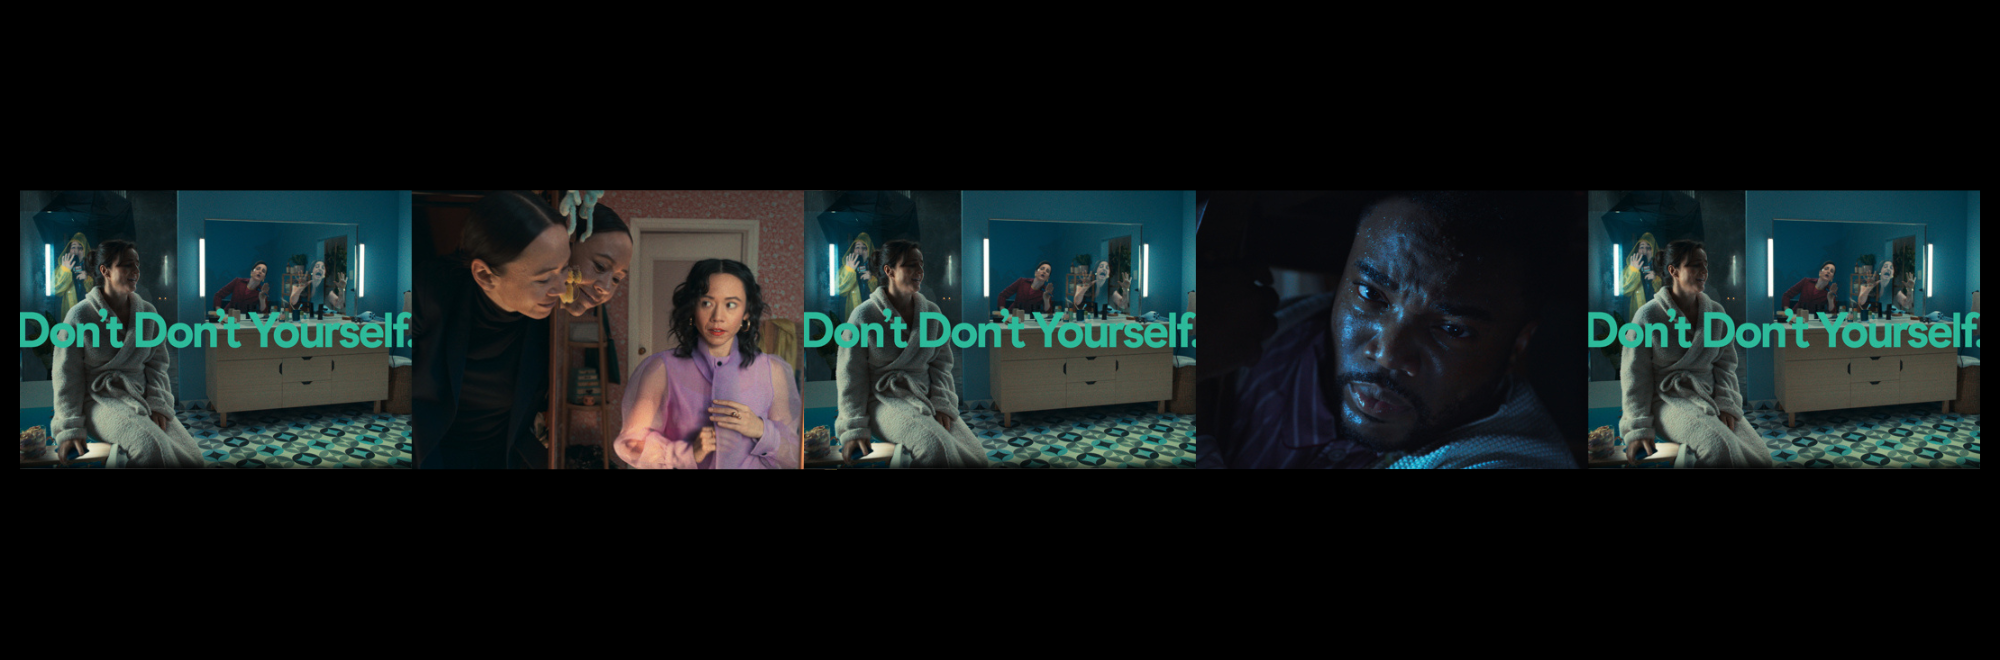 Pinterest defies self-doubt in newest global brand campaign, “Don’t Don’t Yourself”